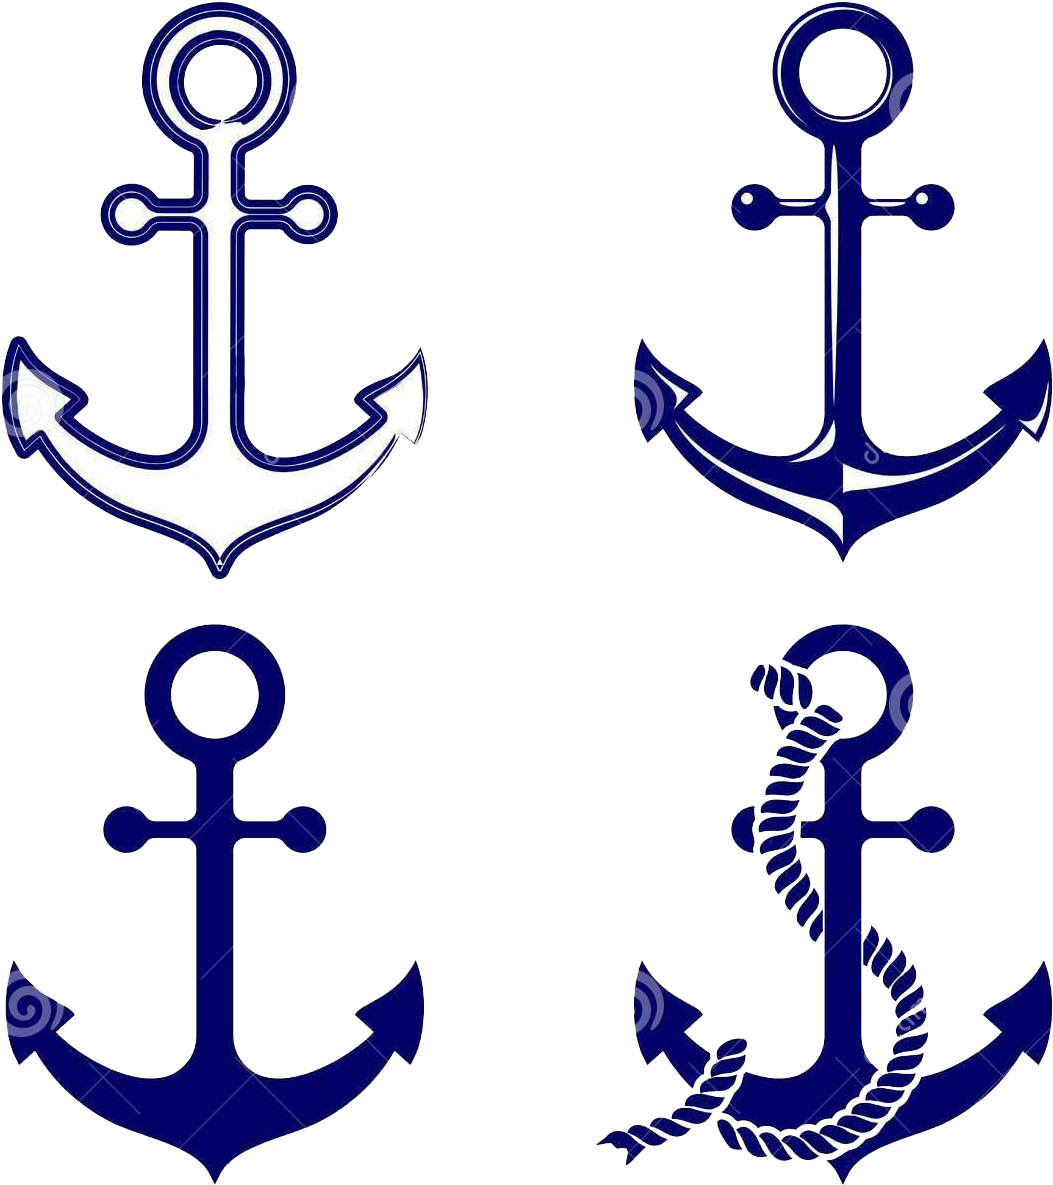 Spear Painted Symbol Hand Anchor Boat - Spear Painted Symbol Hand Anchor Boat (1300x1294)